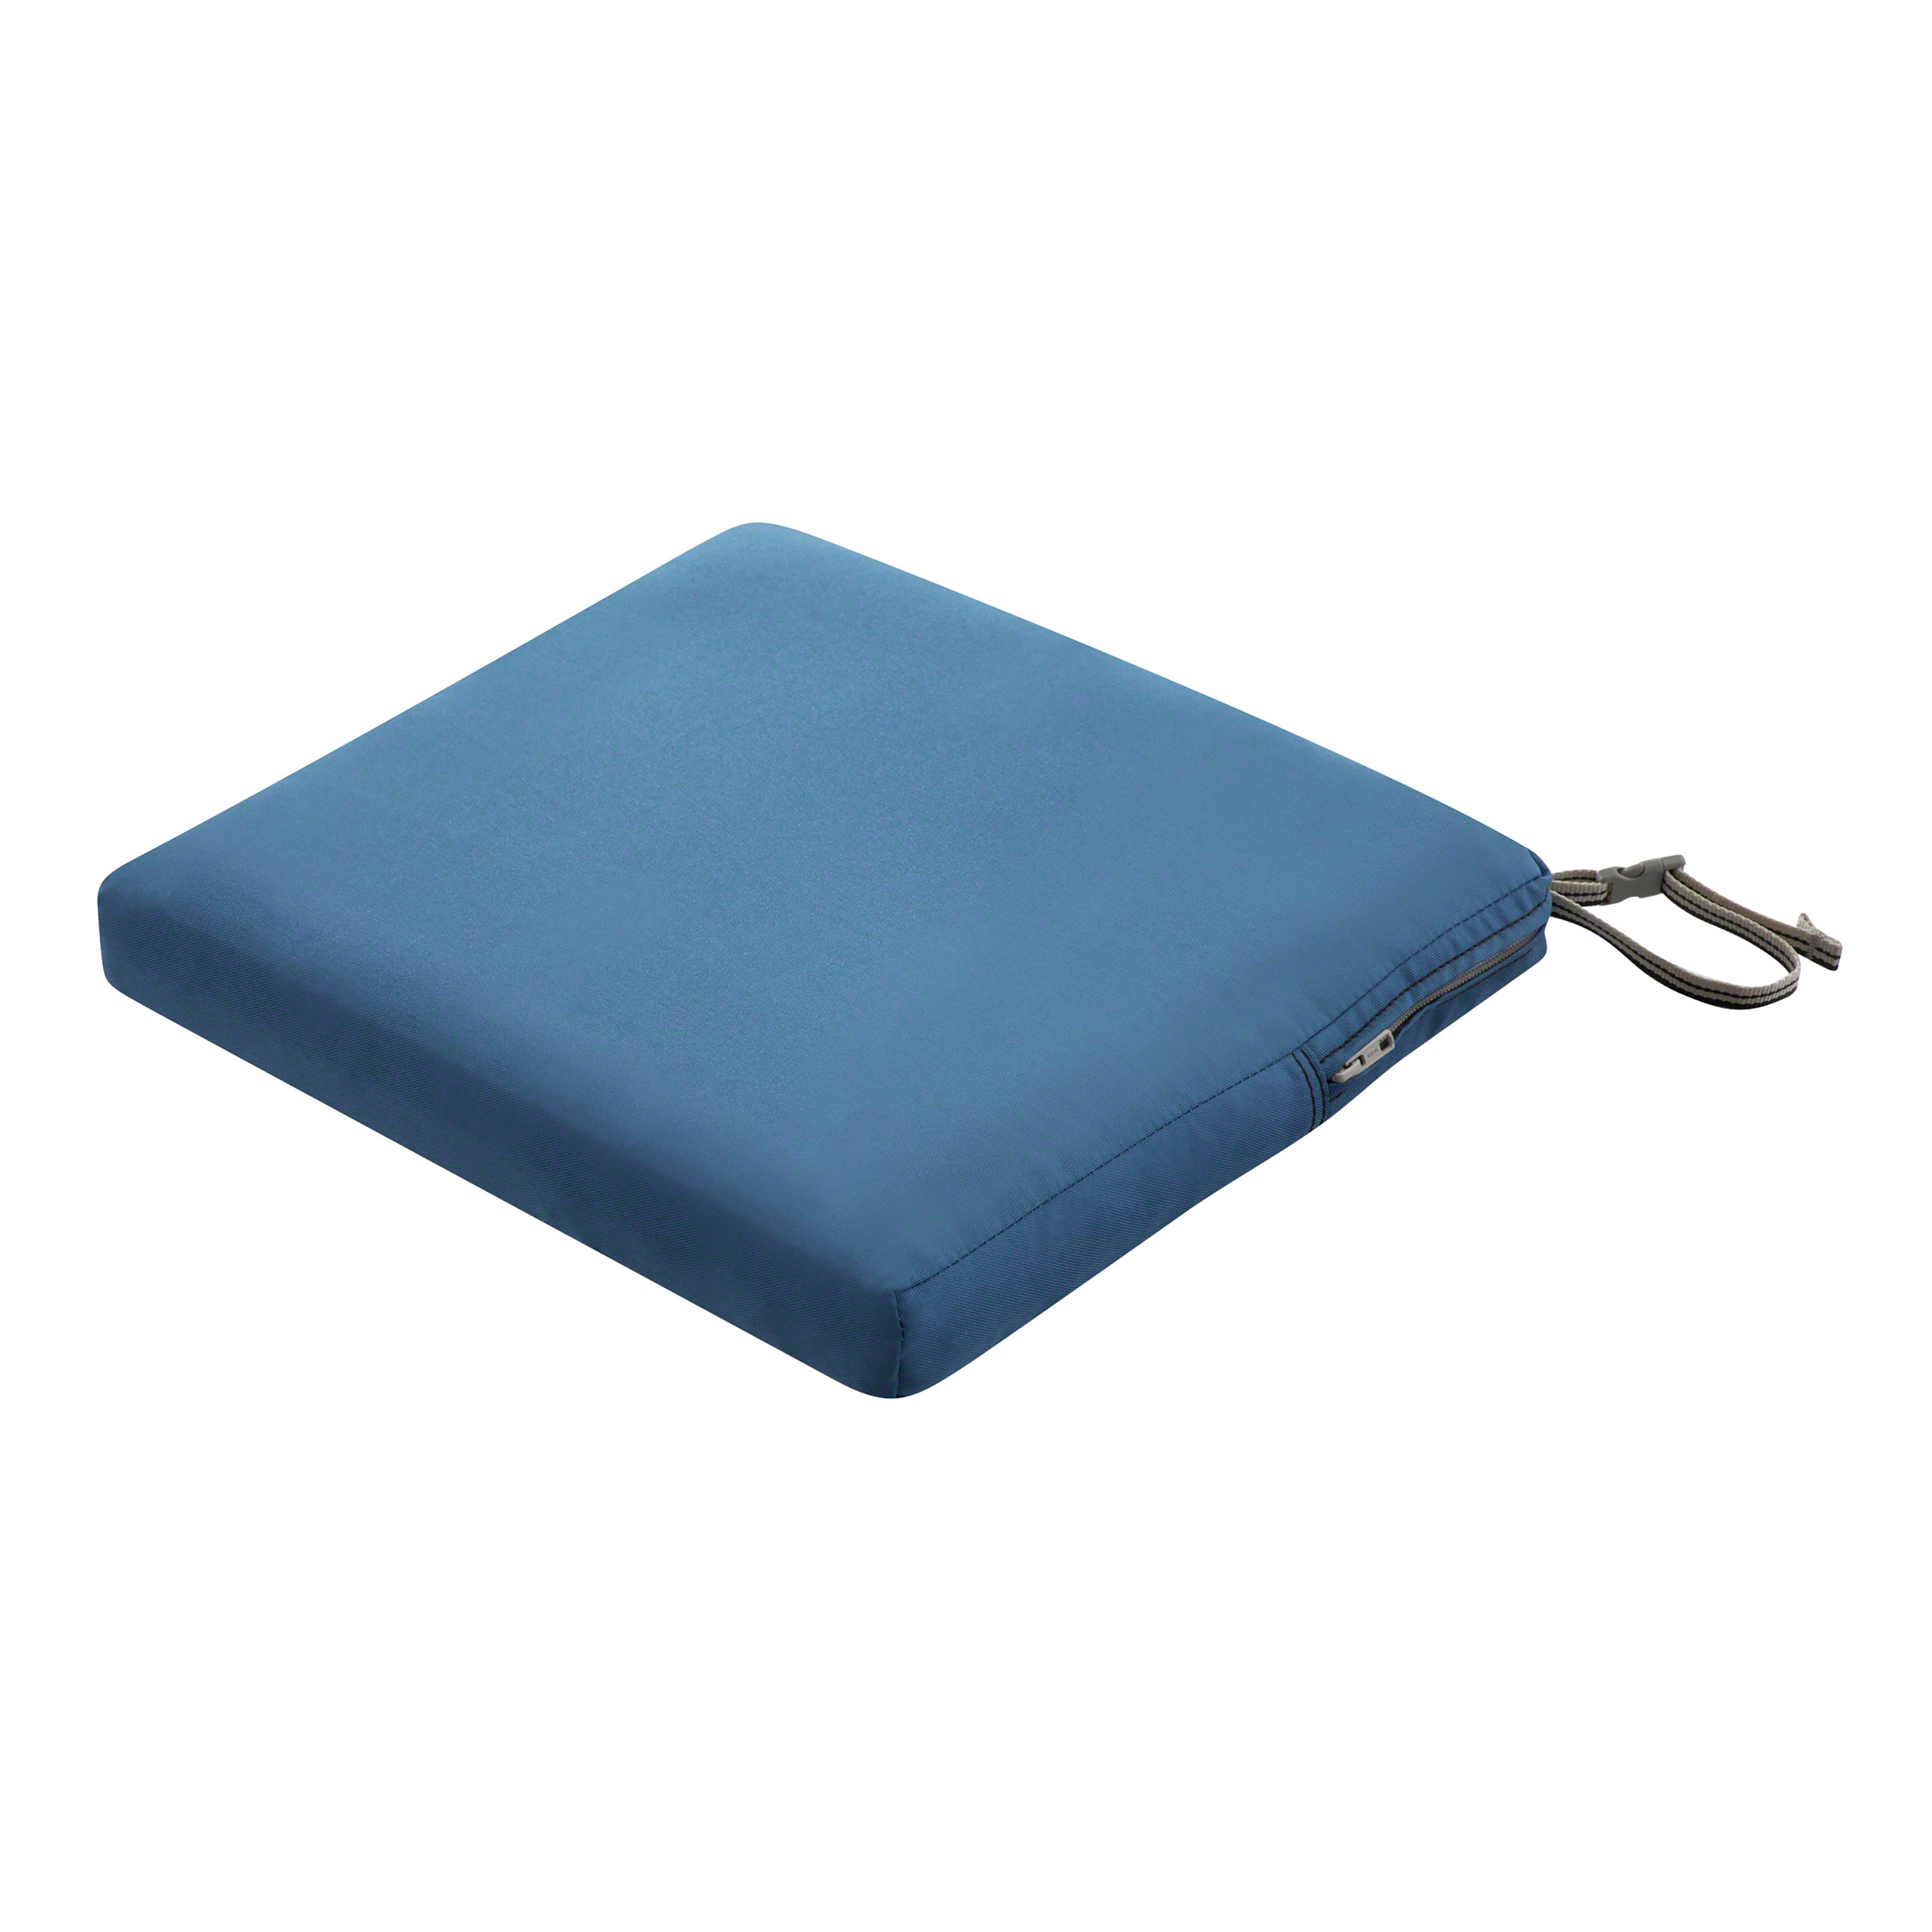 Classic Accessories Patio Lounge Back Cushion Foam - 4 Thick - High-Density